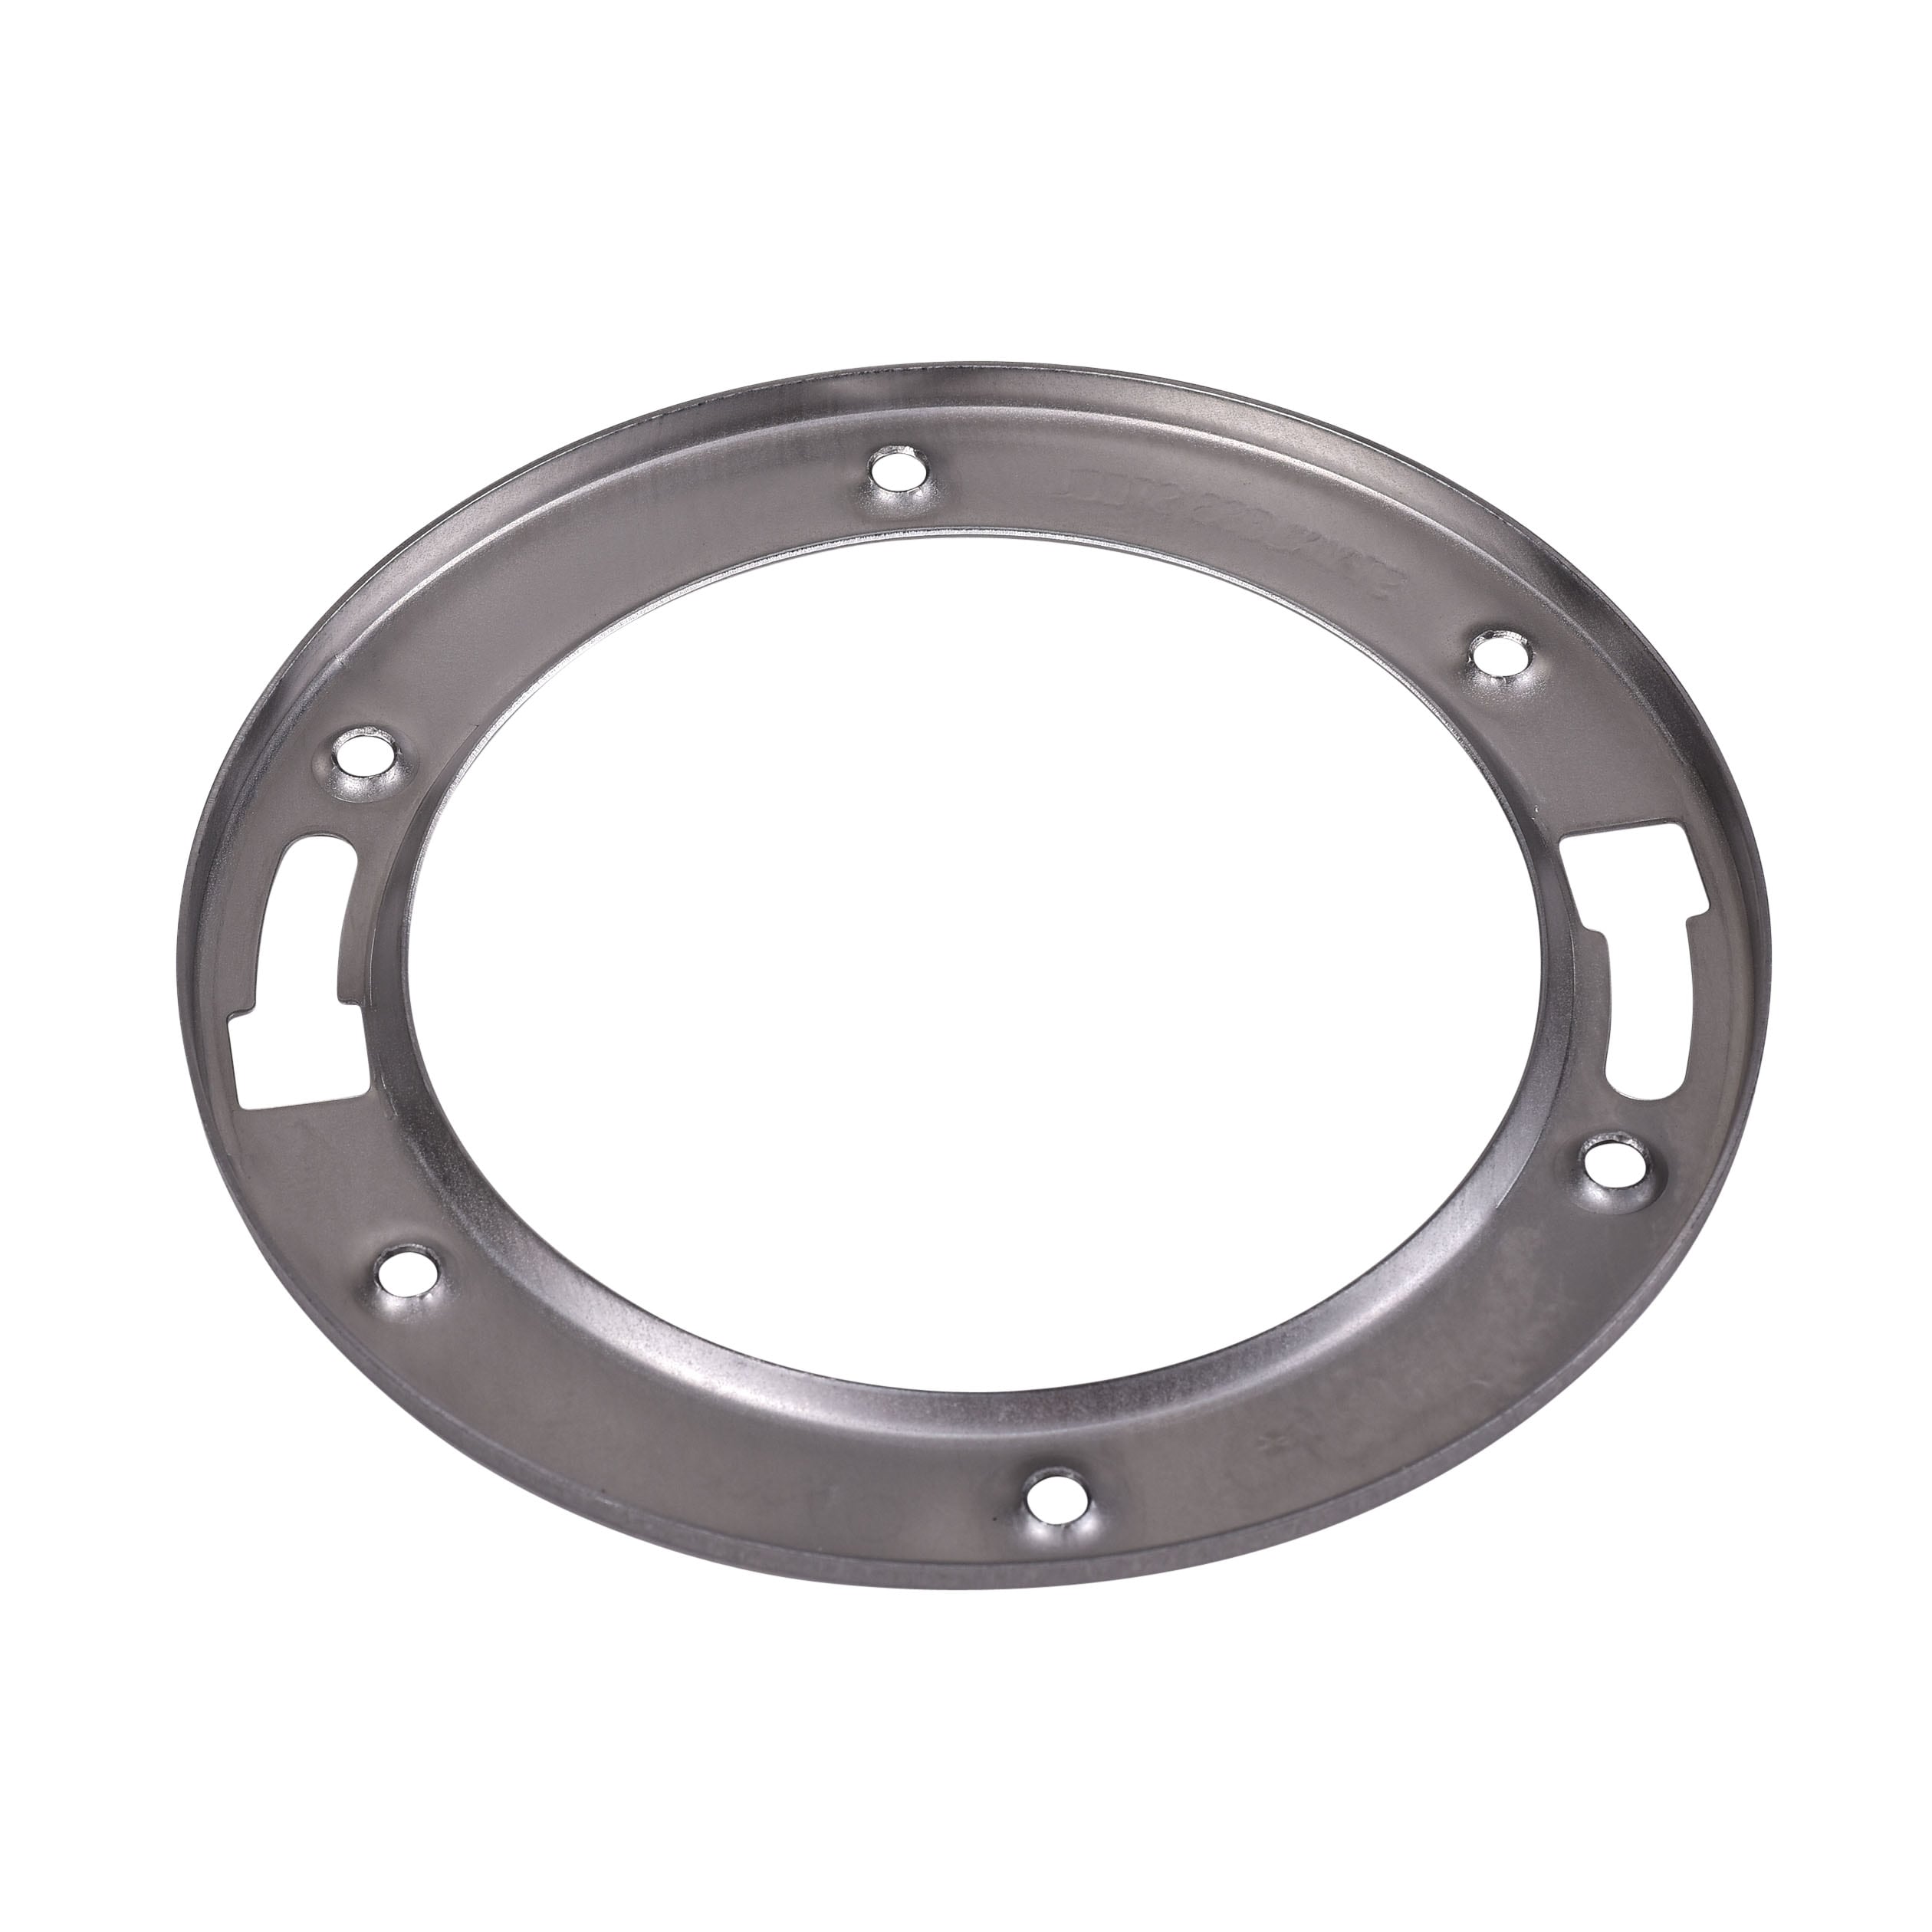 China Piping Solution Supplier - ANSI B16.5 SS316 Blind Flange Ring Type  Joint - China Flange Supplier, Flange | Made-in-China.com